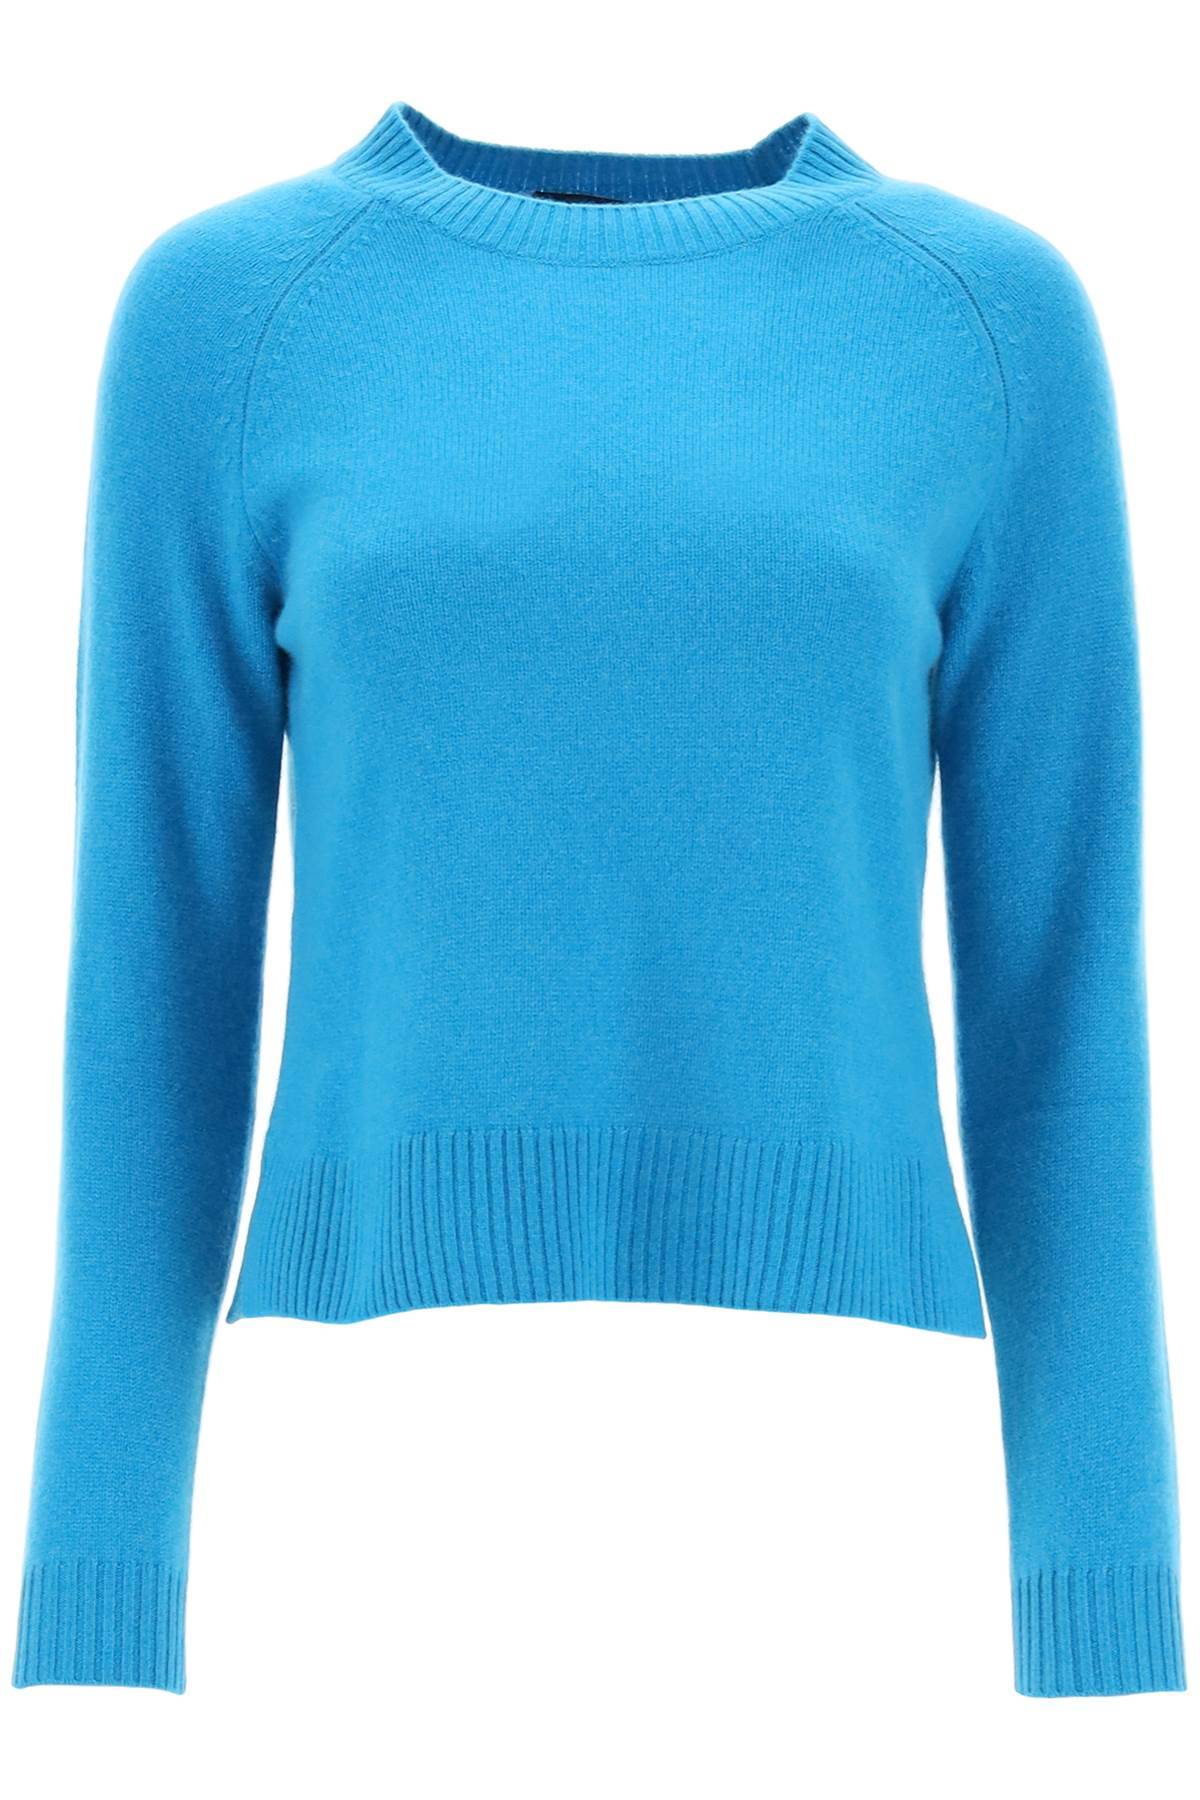 Weekend Max Mara Scatola Cashmere Sweater In Light Blue